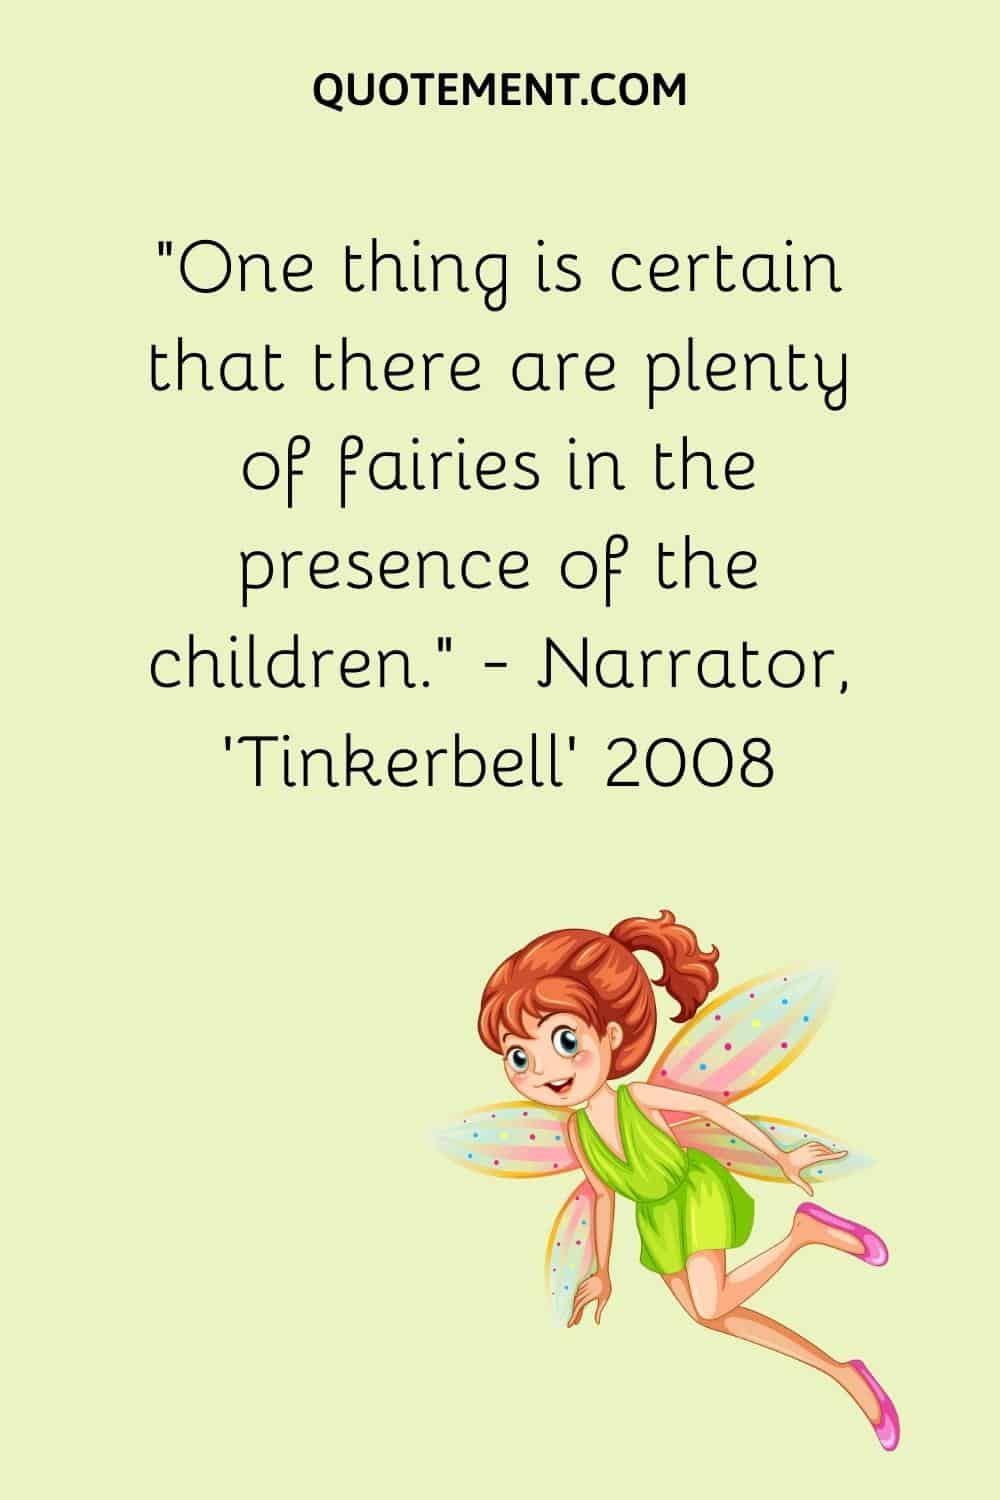 One thing is certain that there are plenty of fairies in the presence of the children